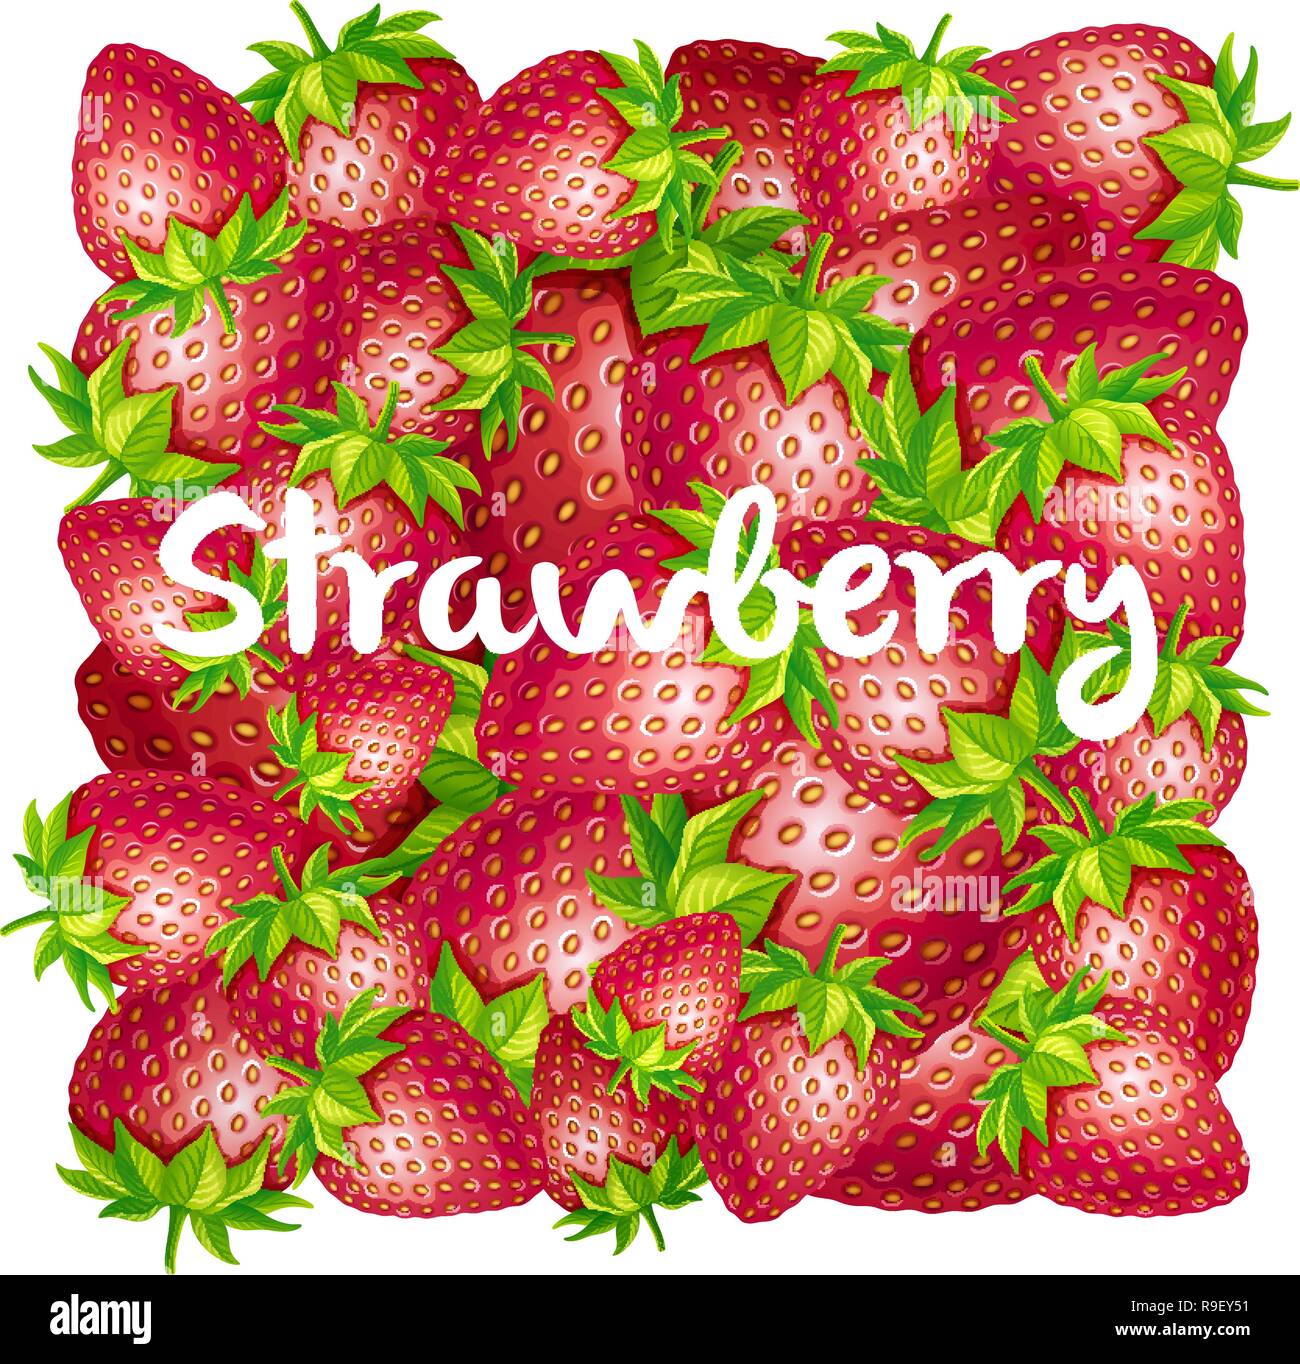 Strawberry square background. Stock Vector